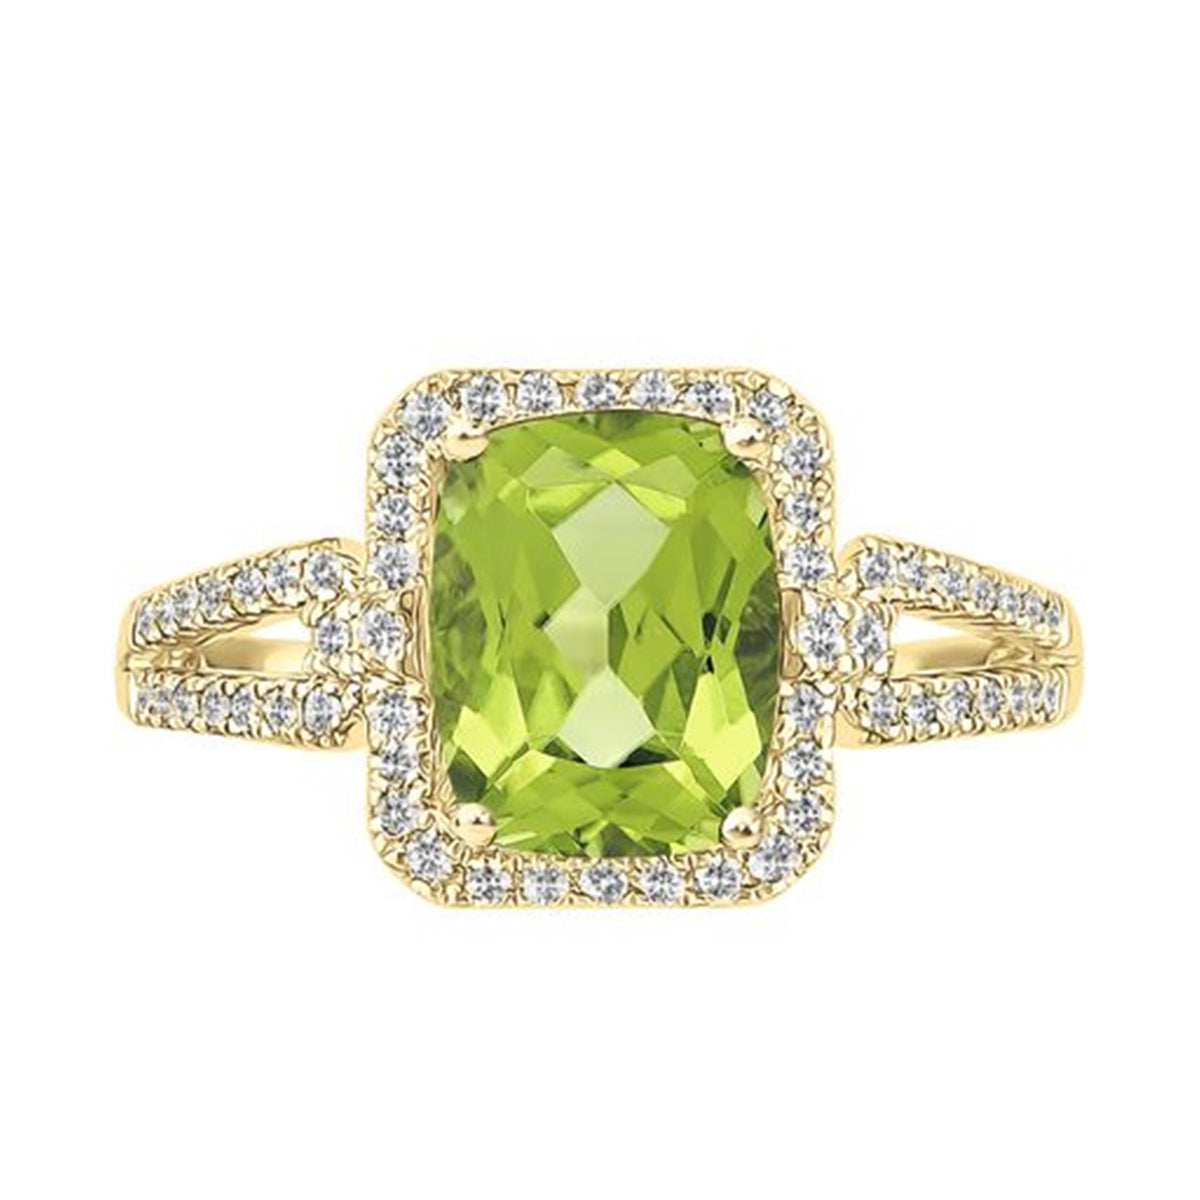 14Kt Yellow Gold Halo Gemstone Ring With 2.35ct Peridot